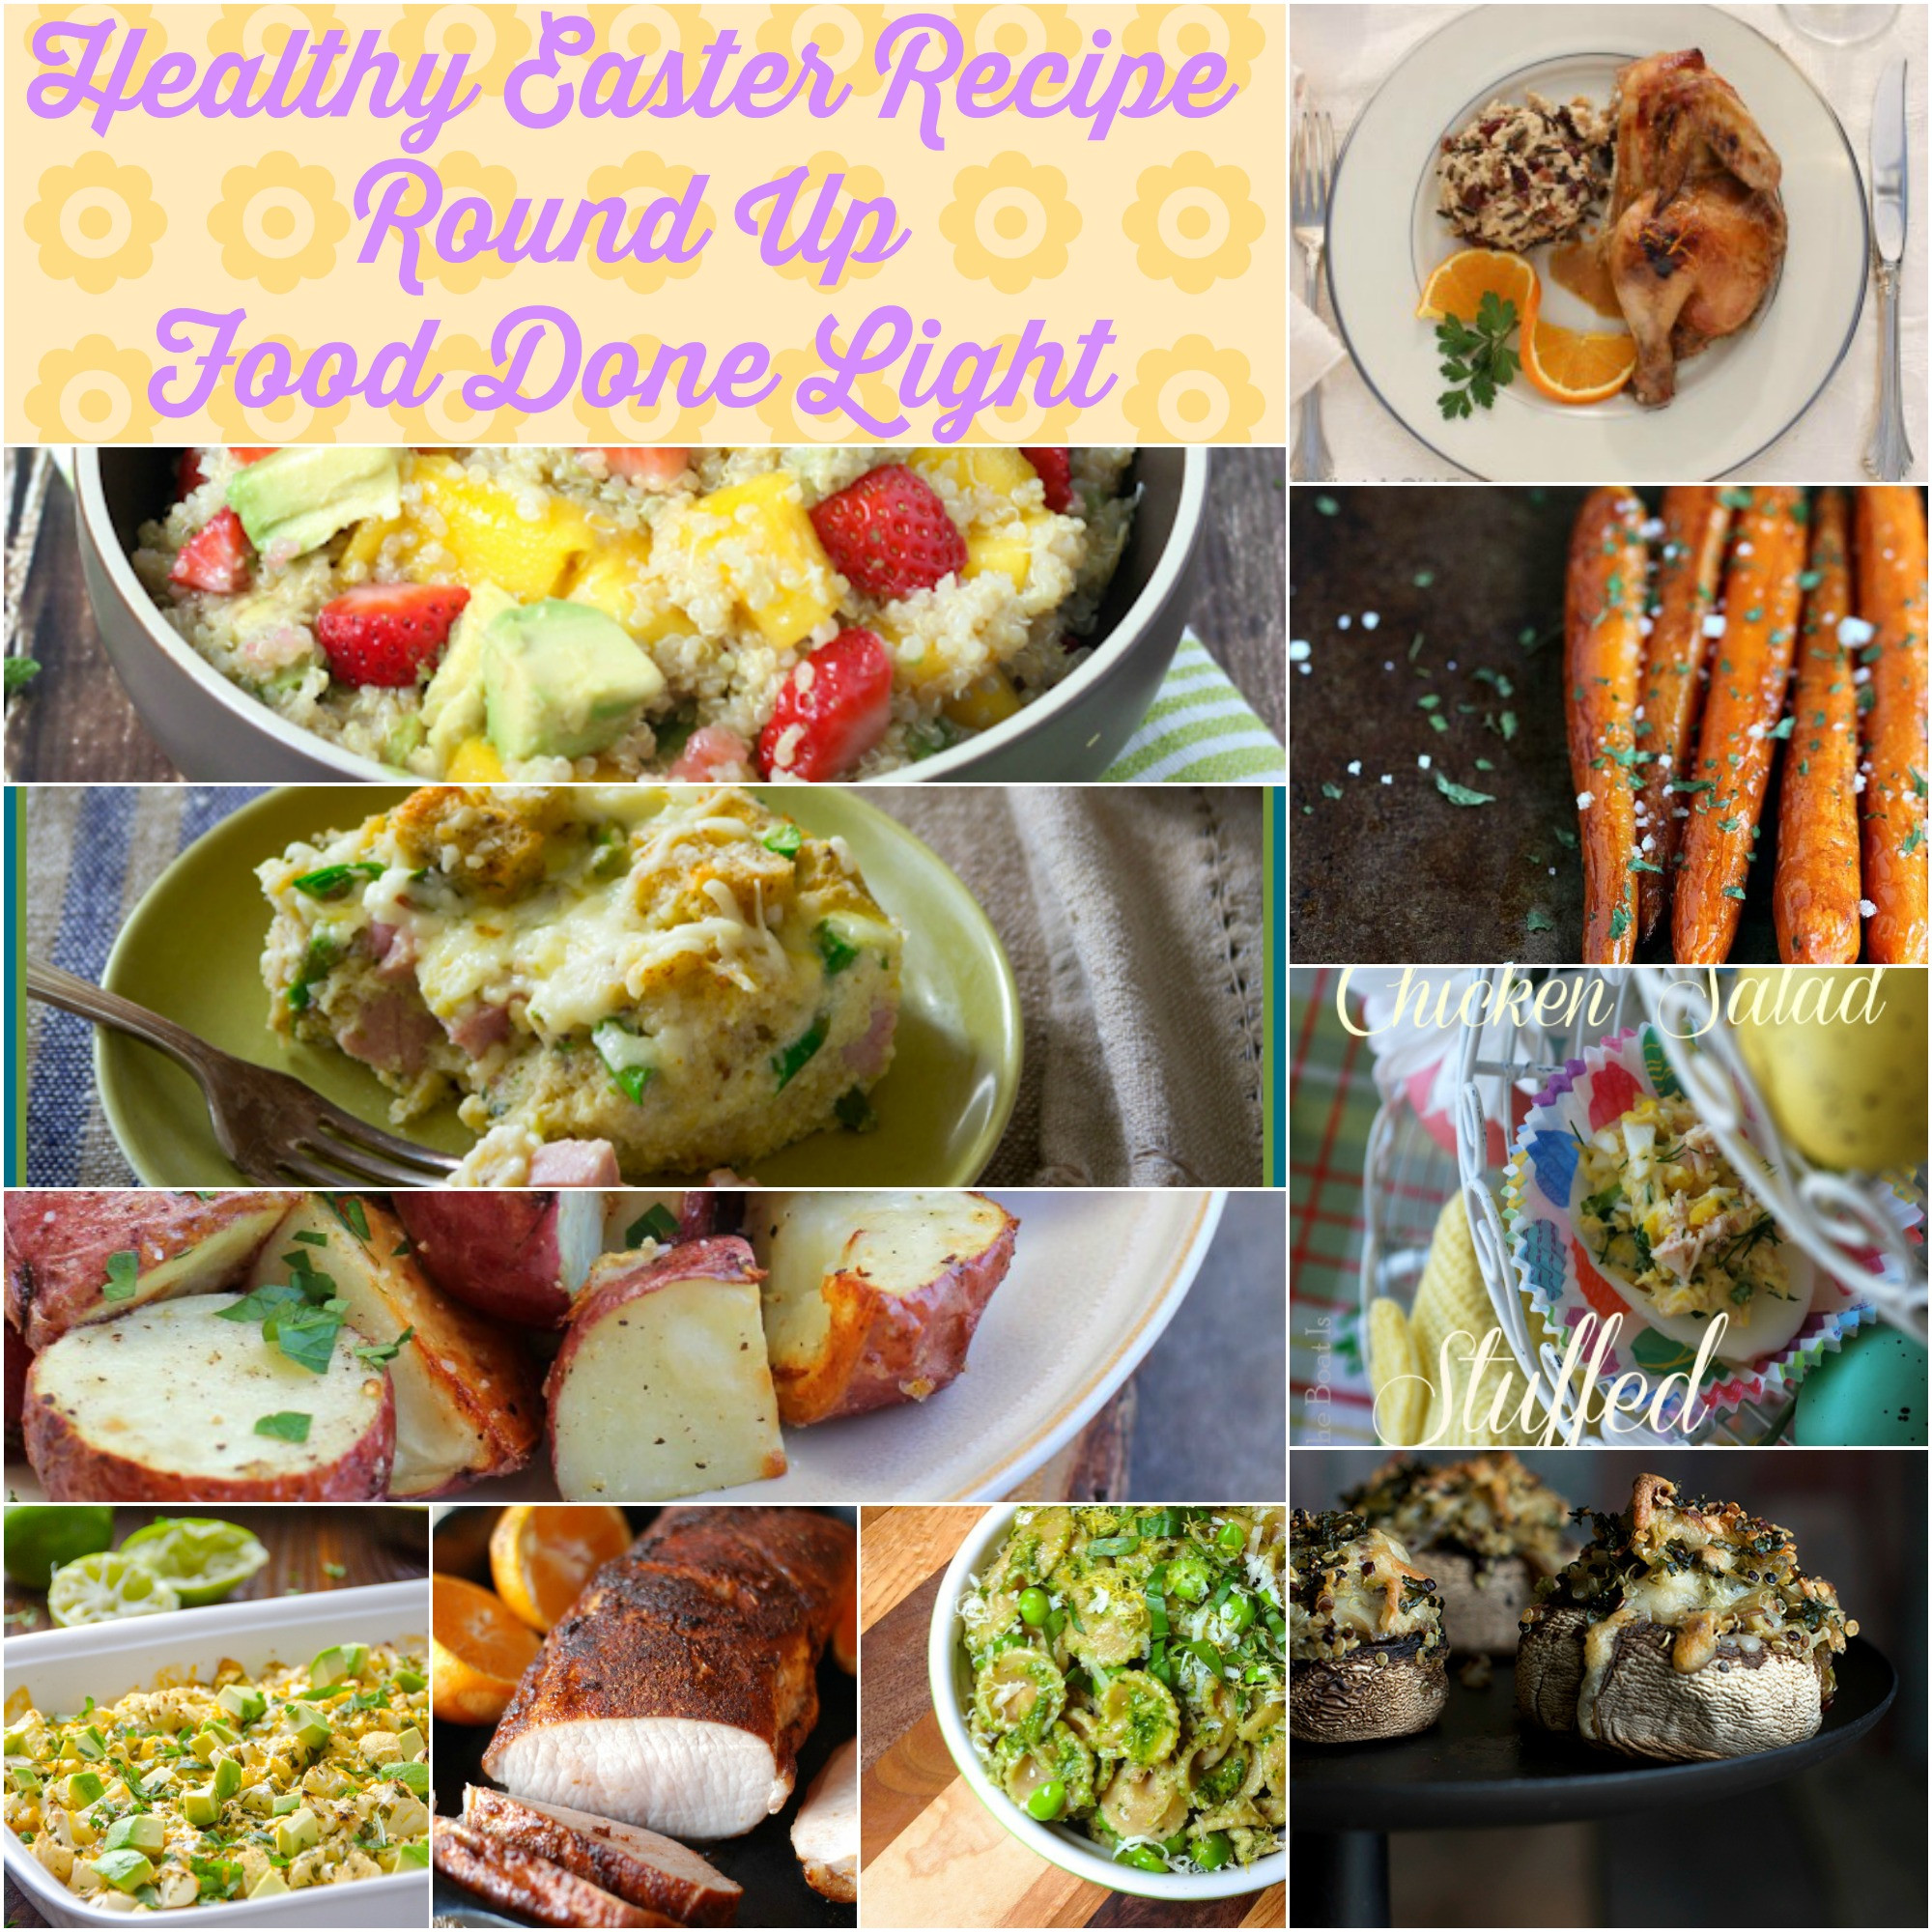 Healthy Easter Dinner Ideas
 Healthy Easter Recipe Round Up Food Done Light